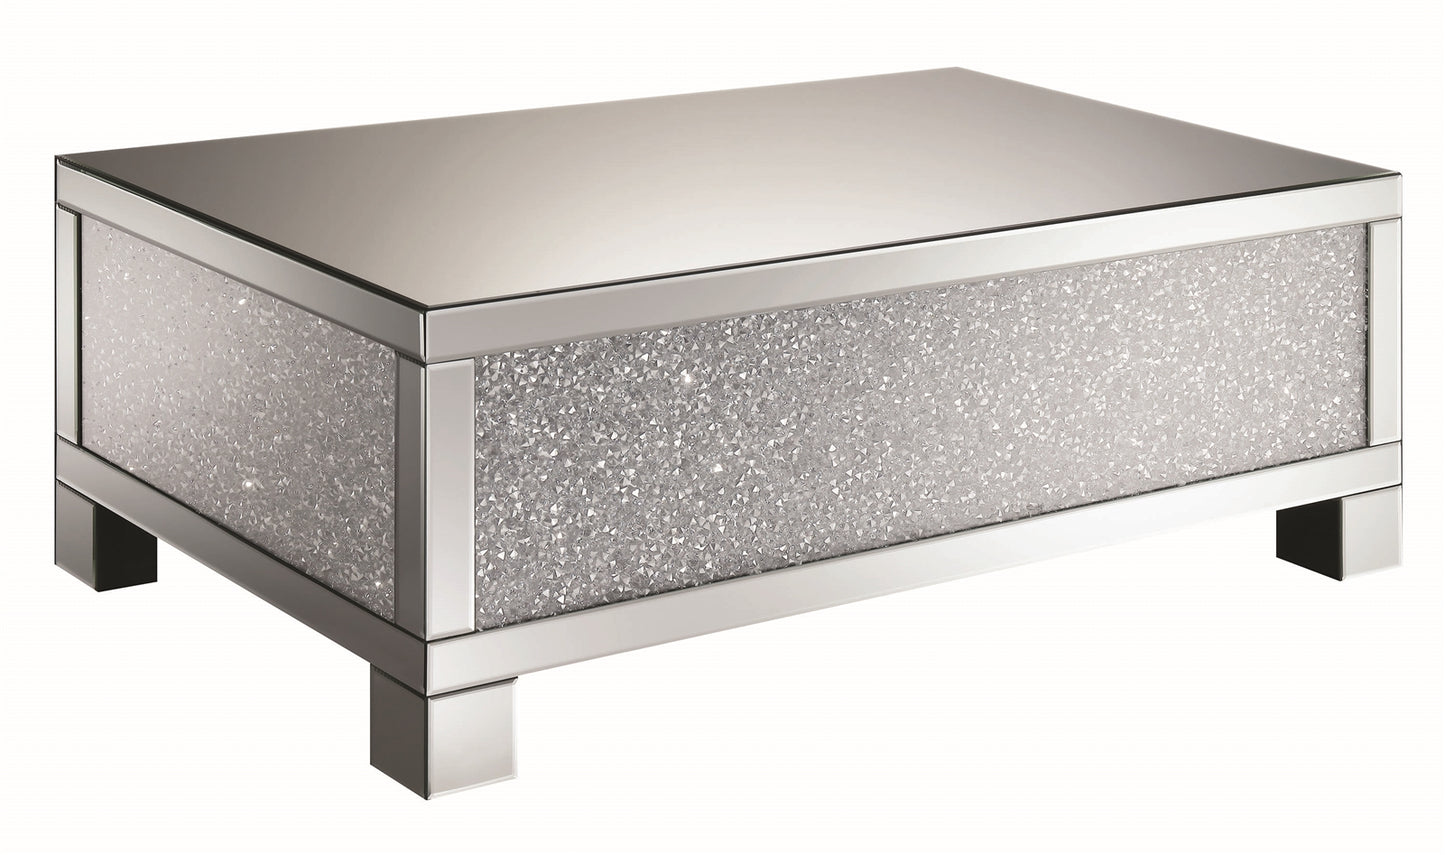 Sparkle & Shine Glam Style Coffee Table